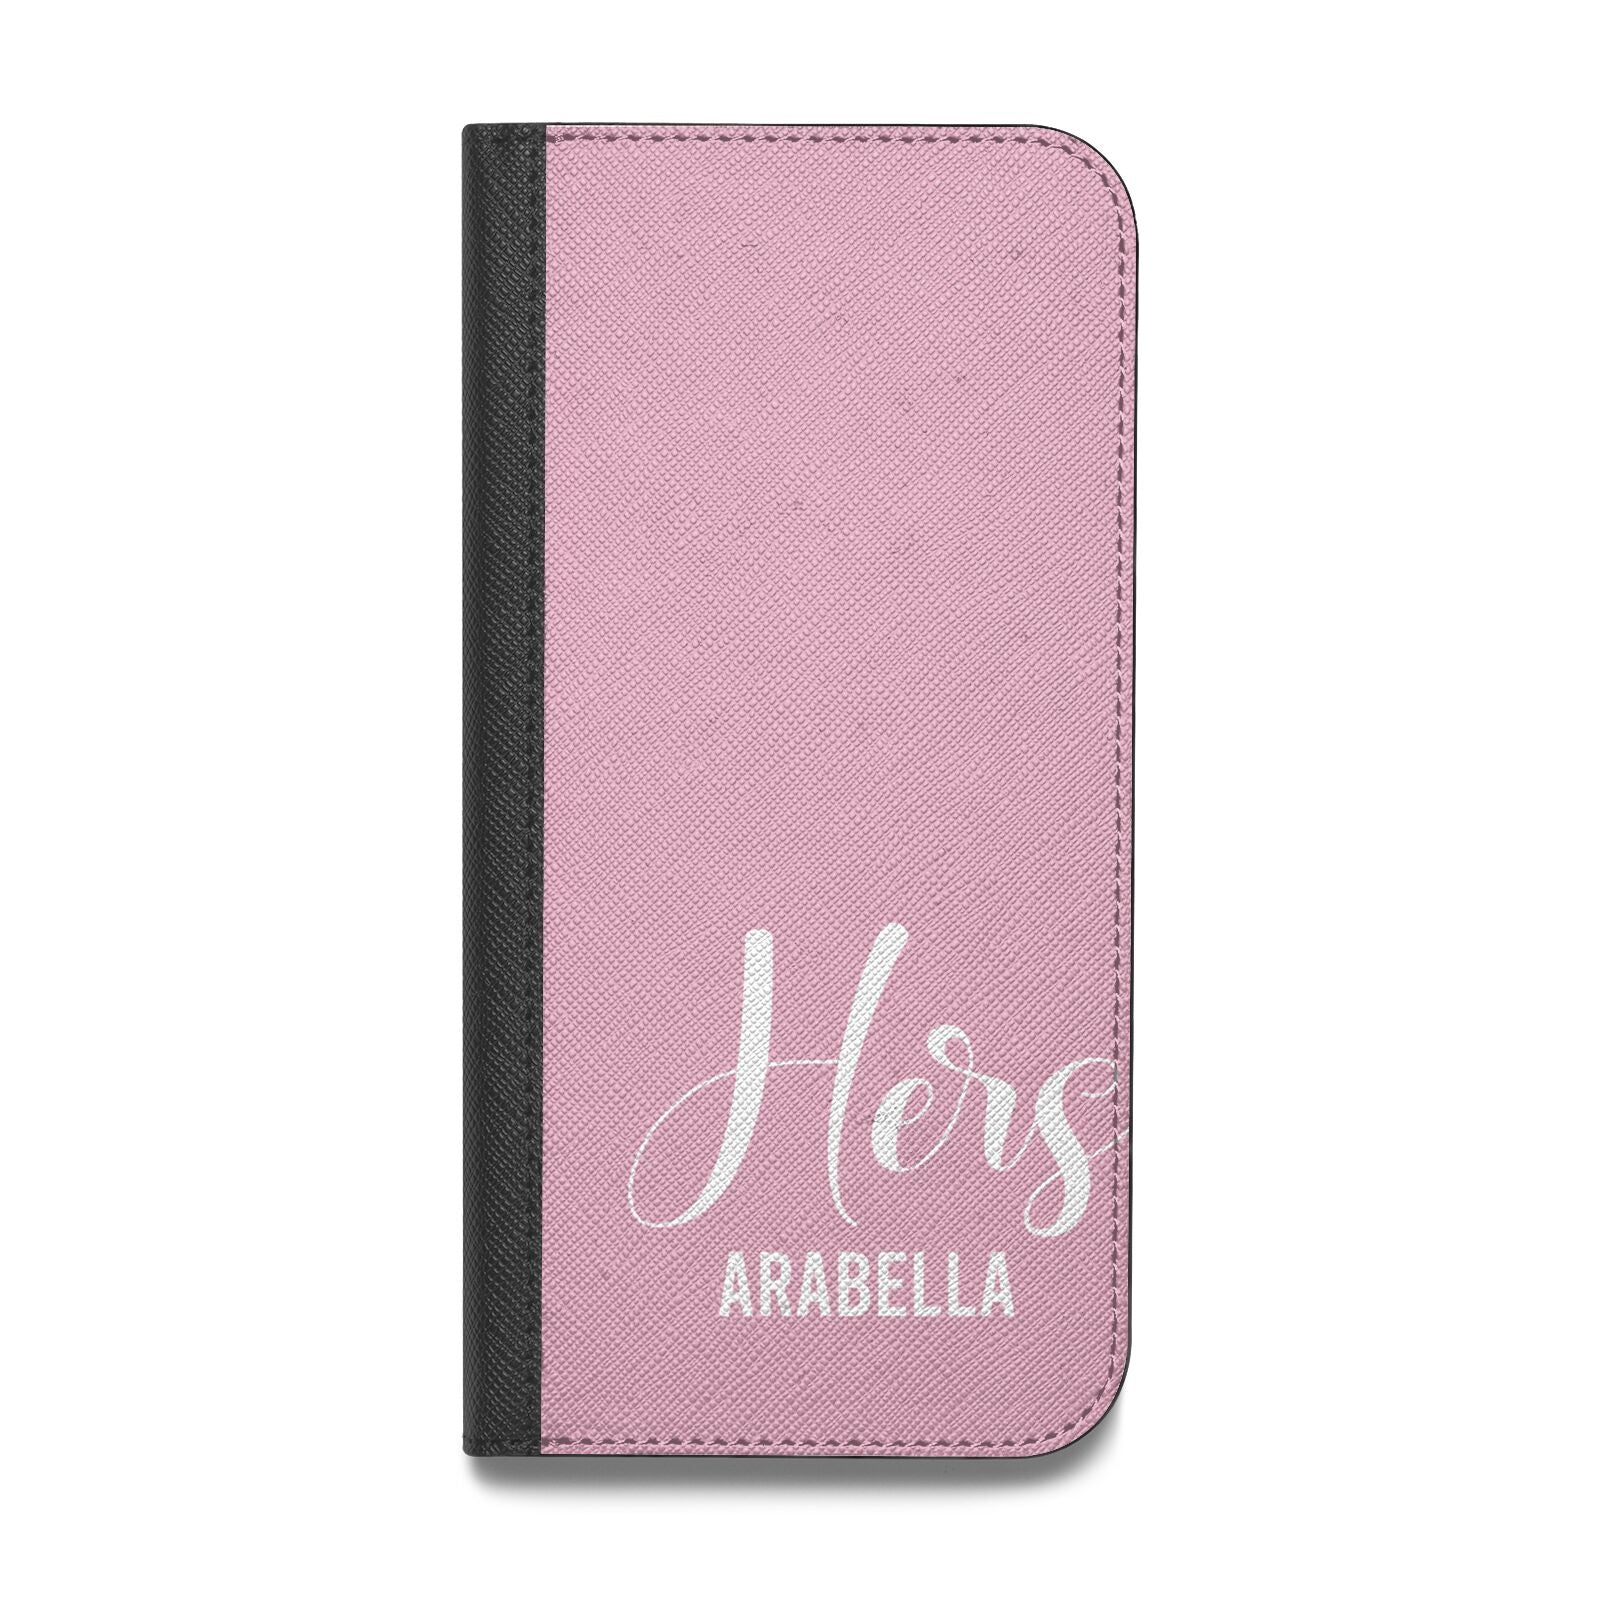 His or Hers Personalised Vegan Leather Flip iPhone Case